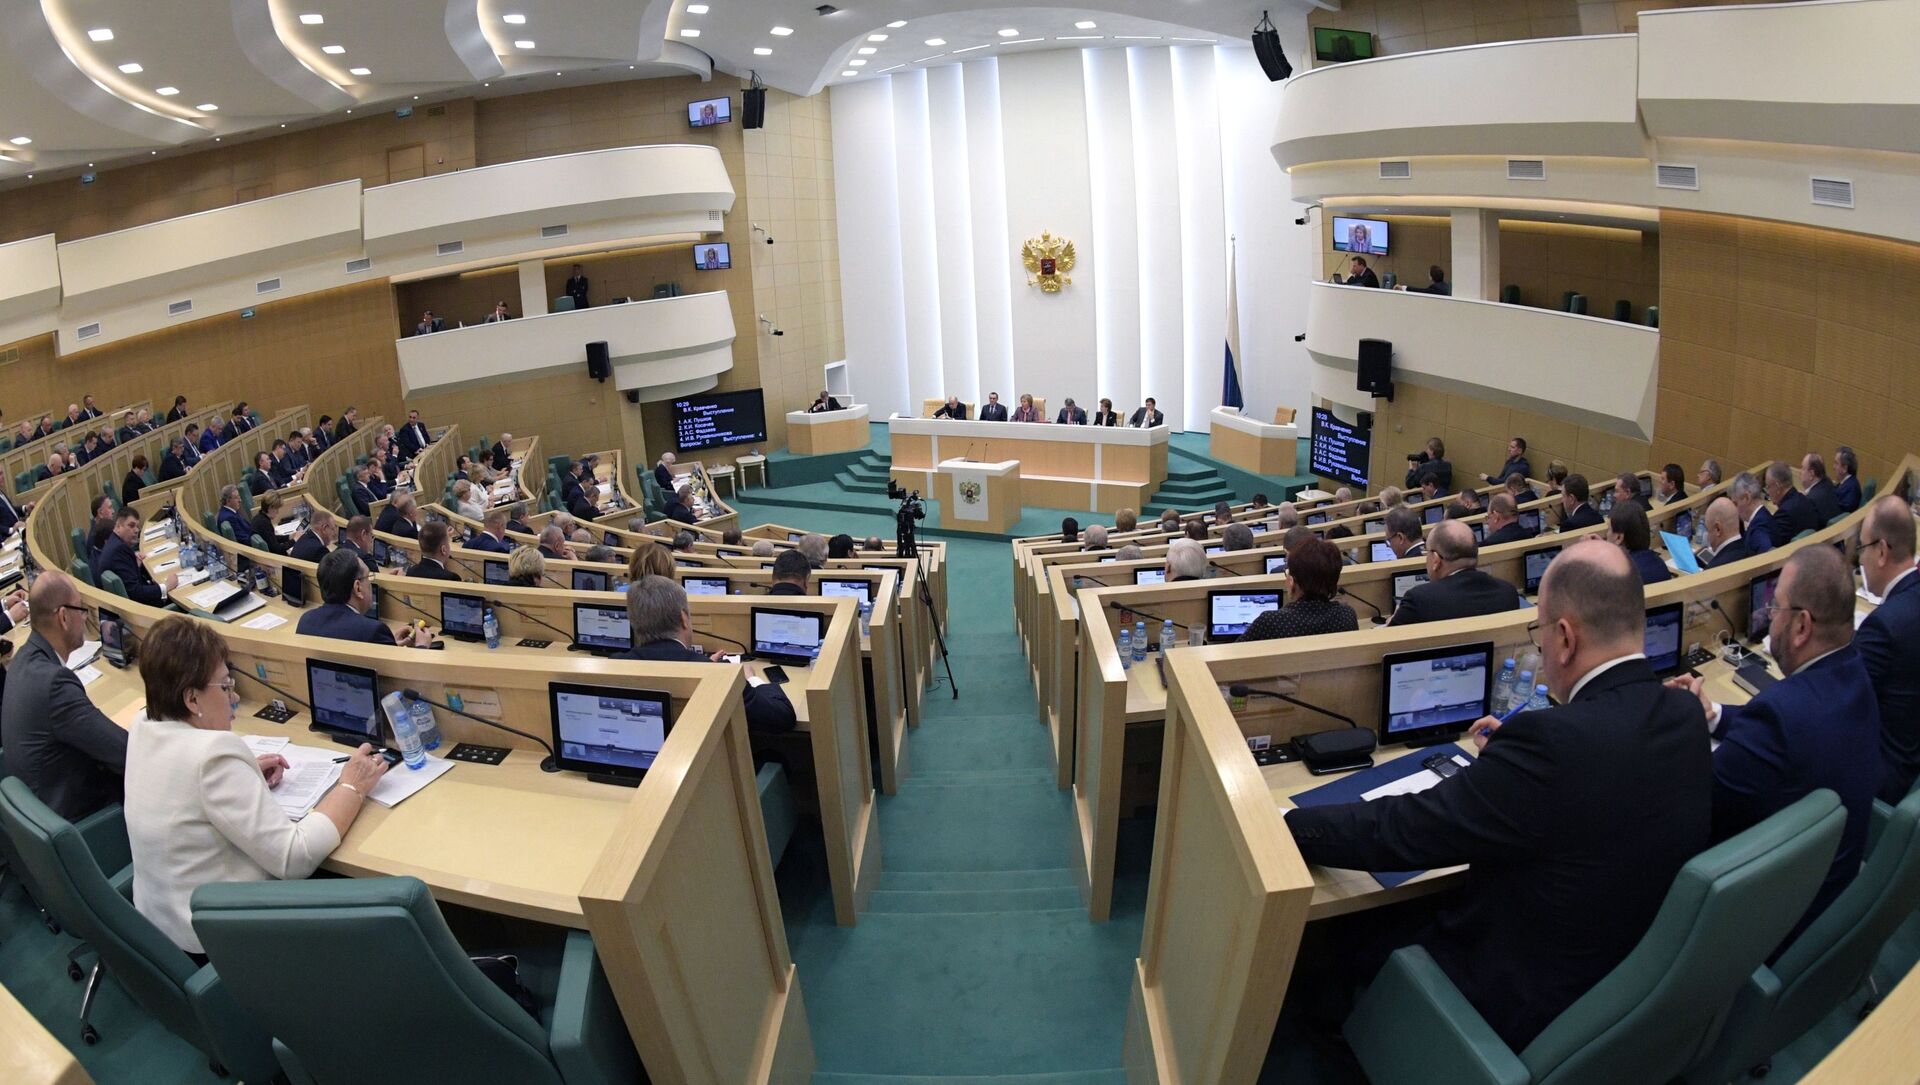 Meeting of the Federation Council of the Russian Federation concluding the autumn session - Sputnik International, 1920, 02.03.2021